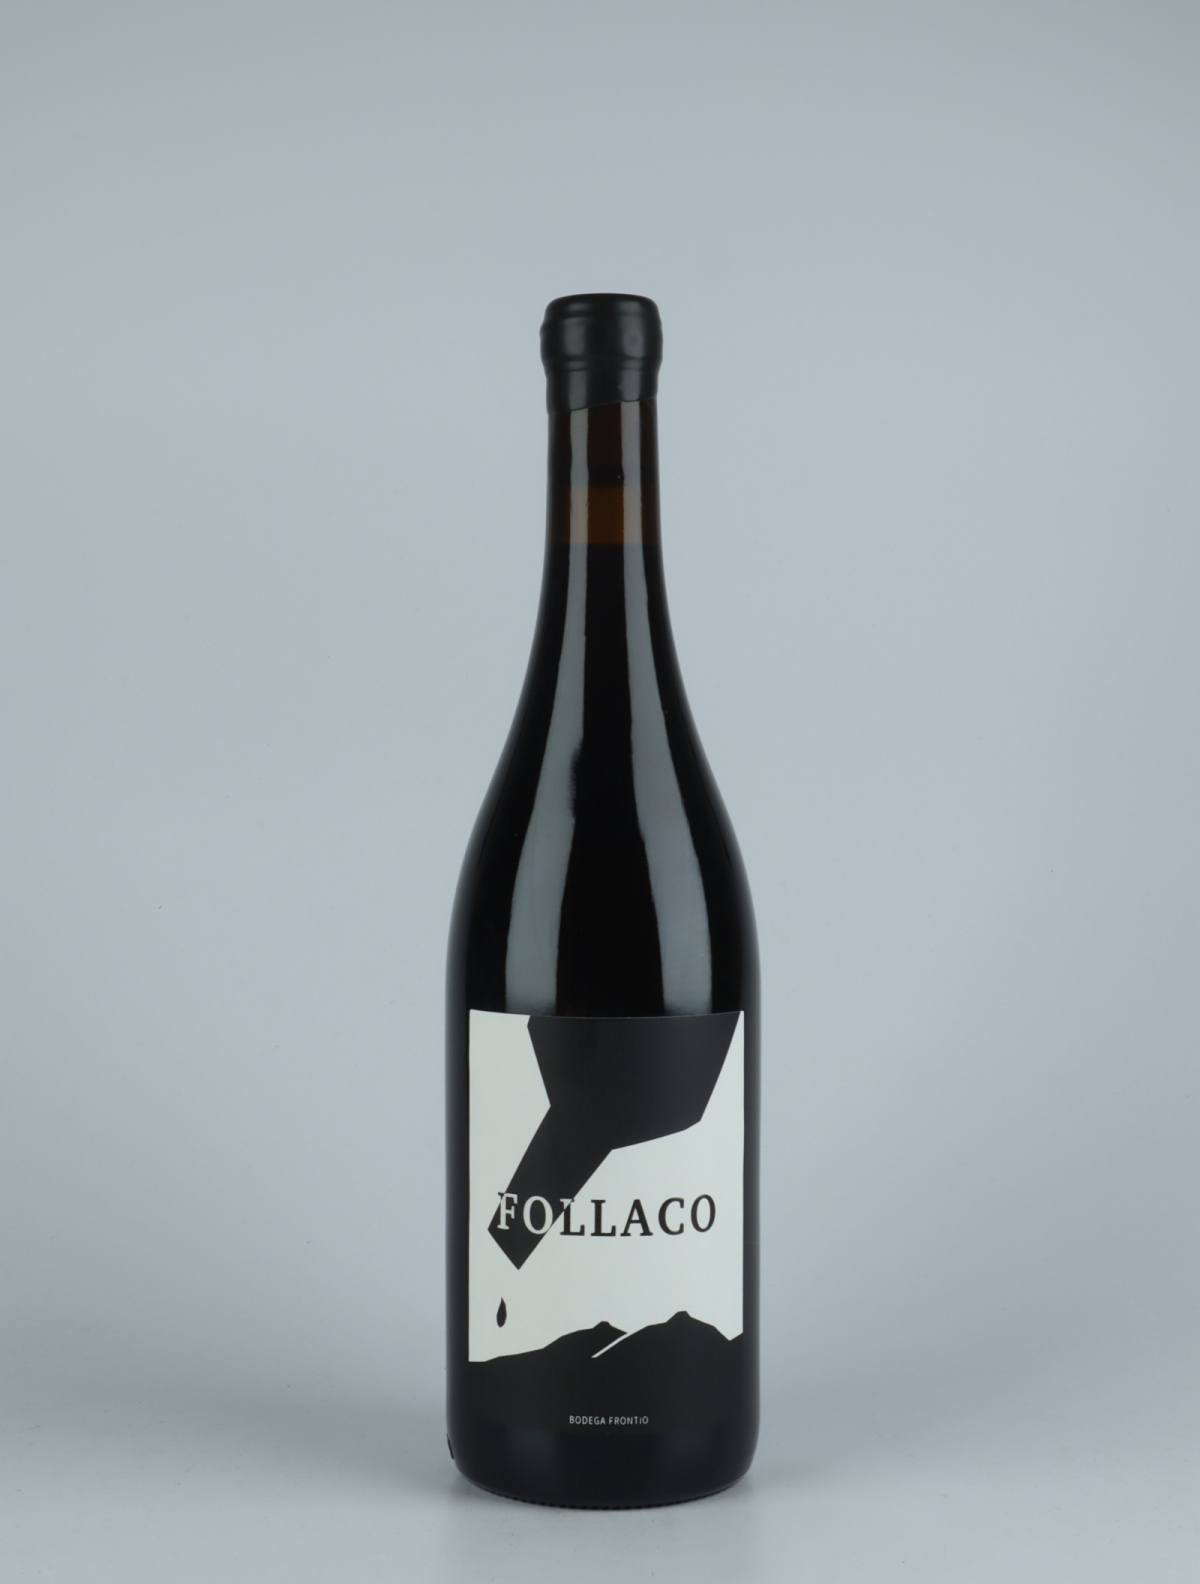 A bottle 2020 Follaco Red wine from Bodega Frontio, Arribes in Spain